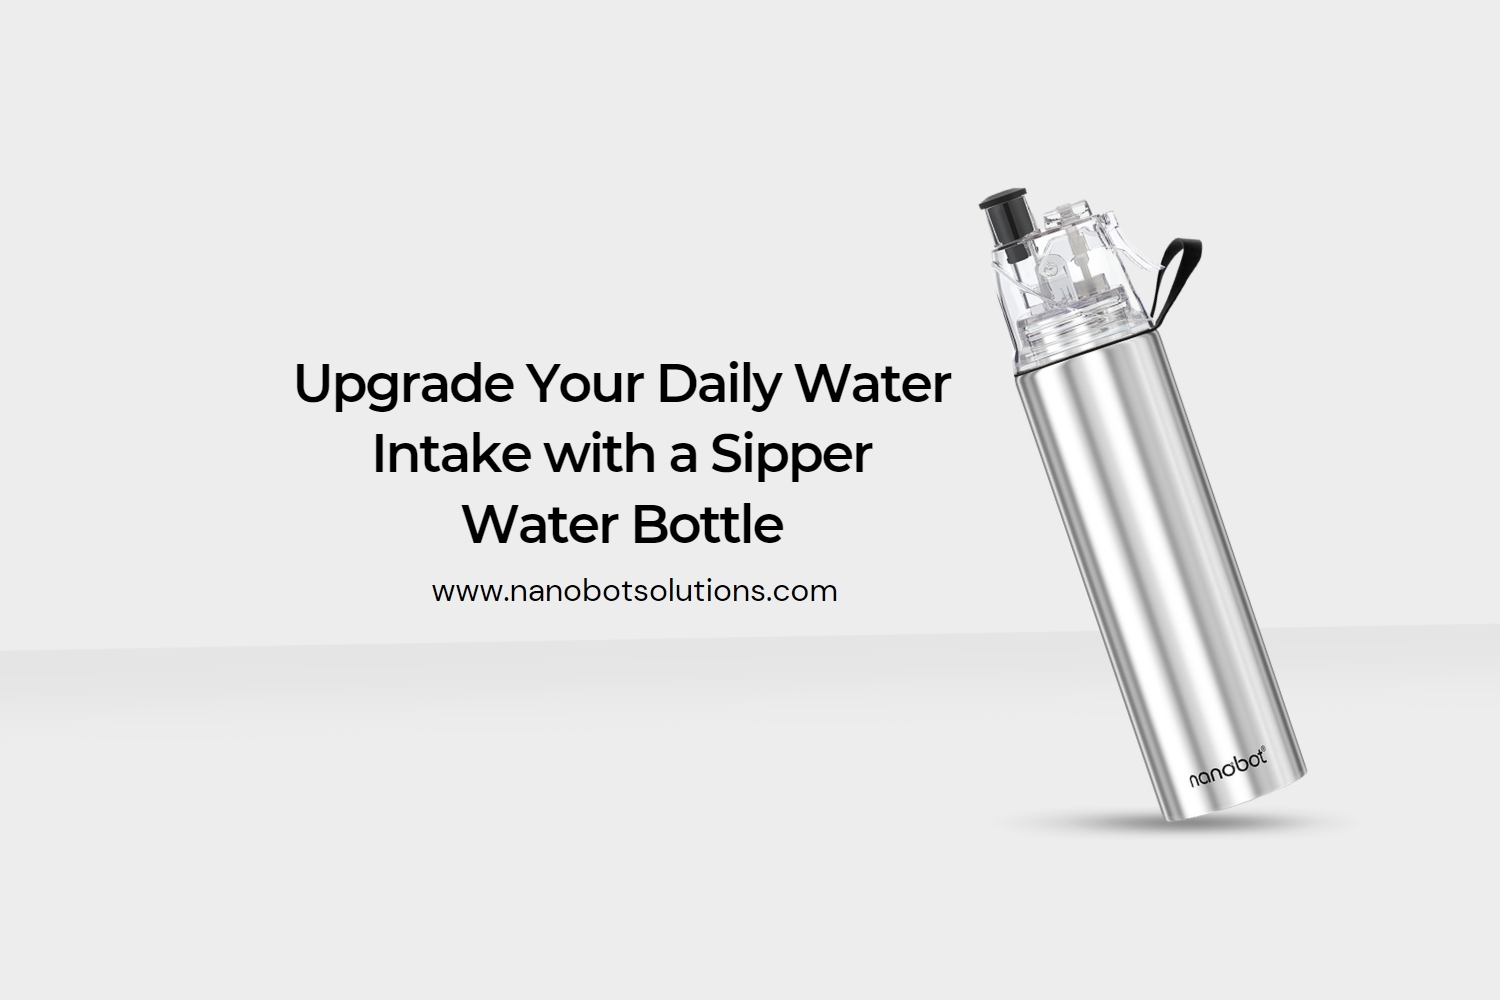 Upgrade Your Daily Water Intake with a Sipper Water Bottle | Nanobot